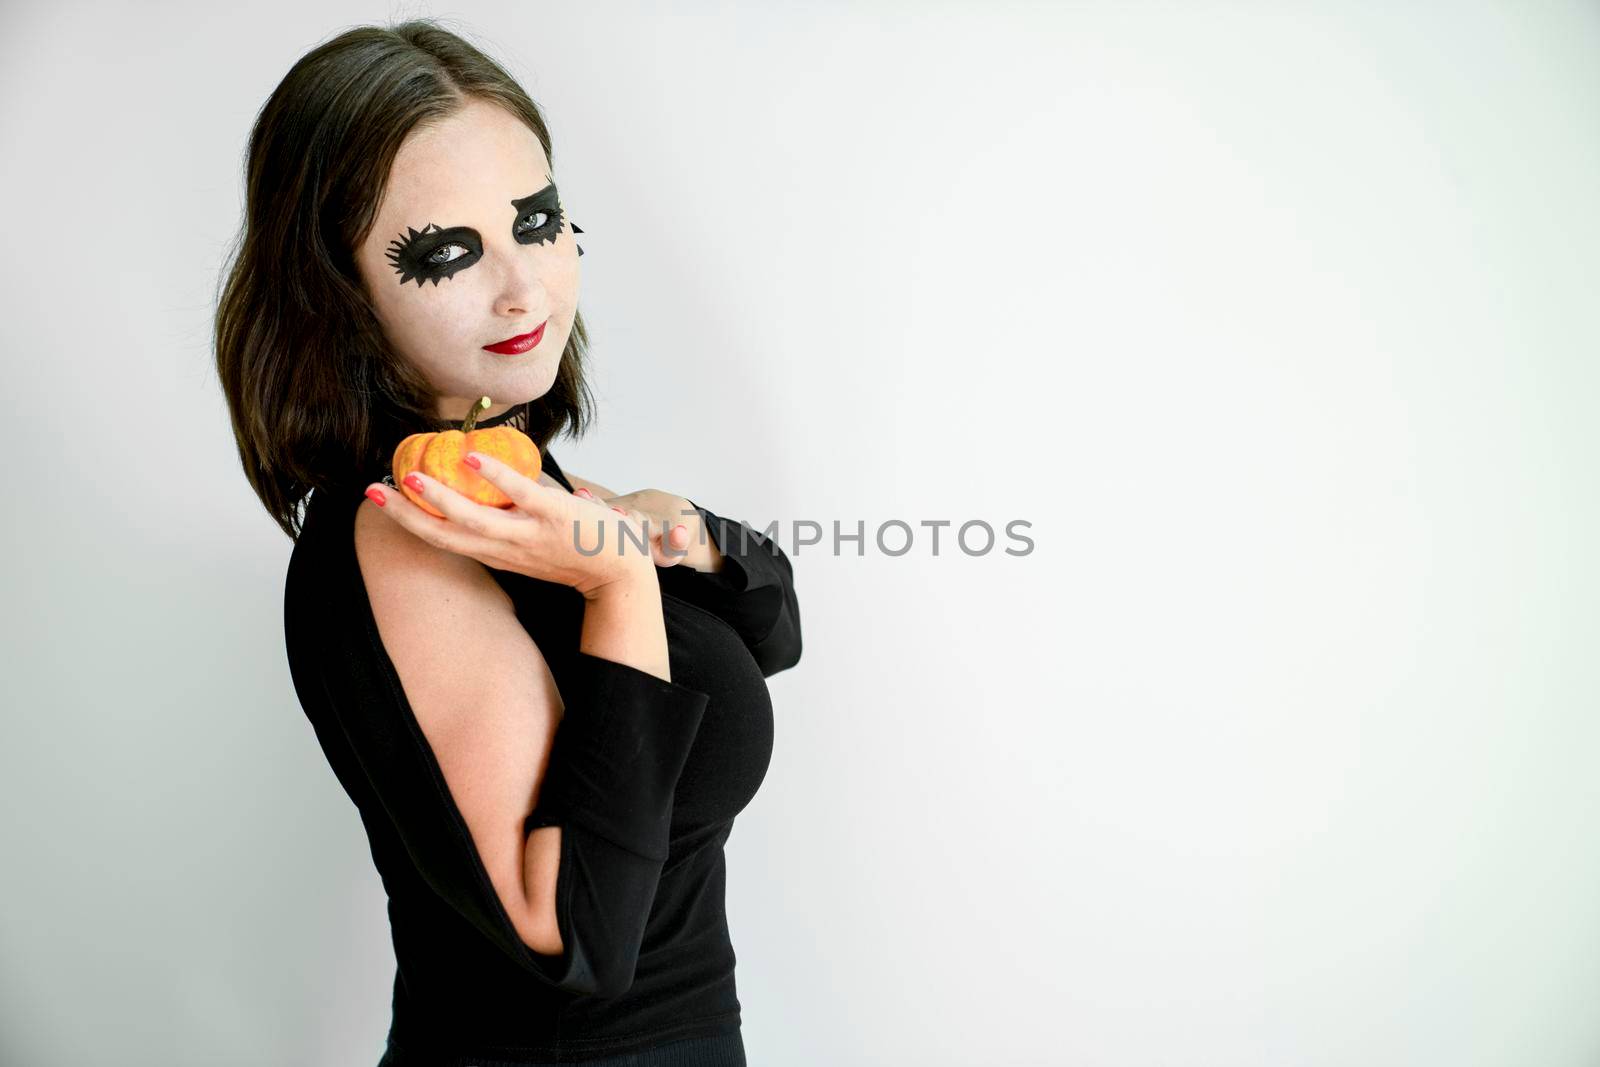 Girl with Halloween makeup on face holds pumpkin in hand by Laguna781